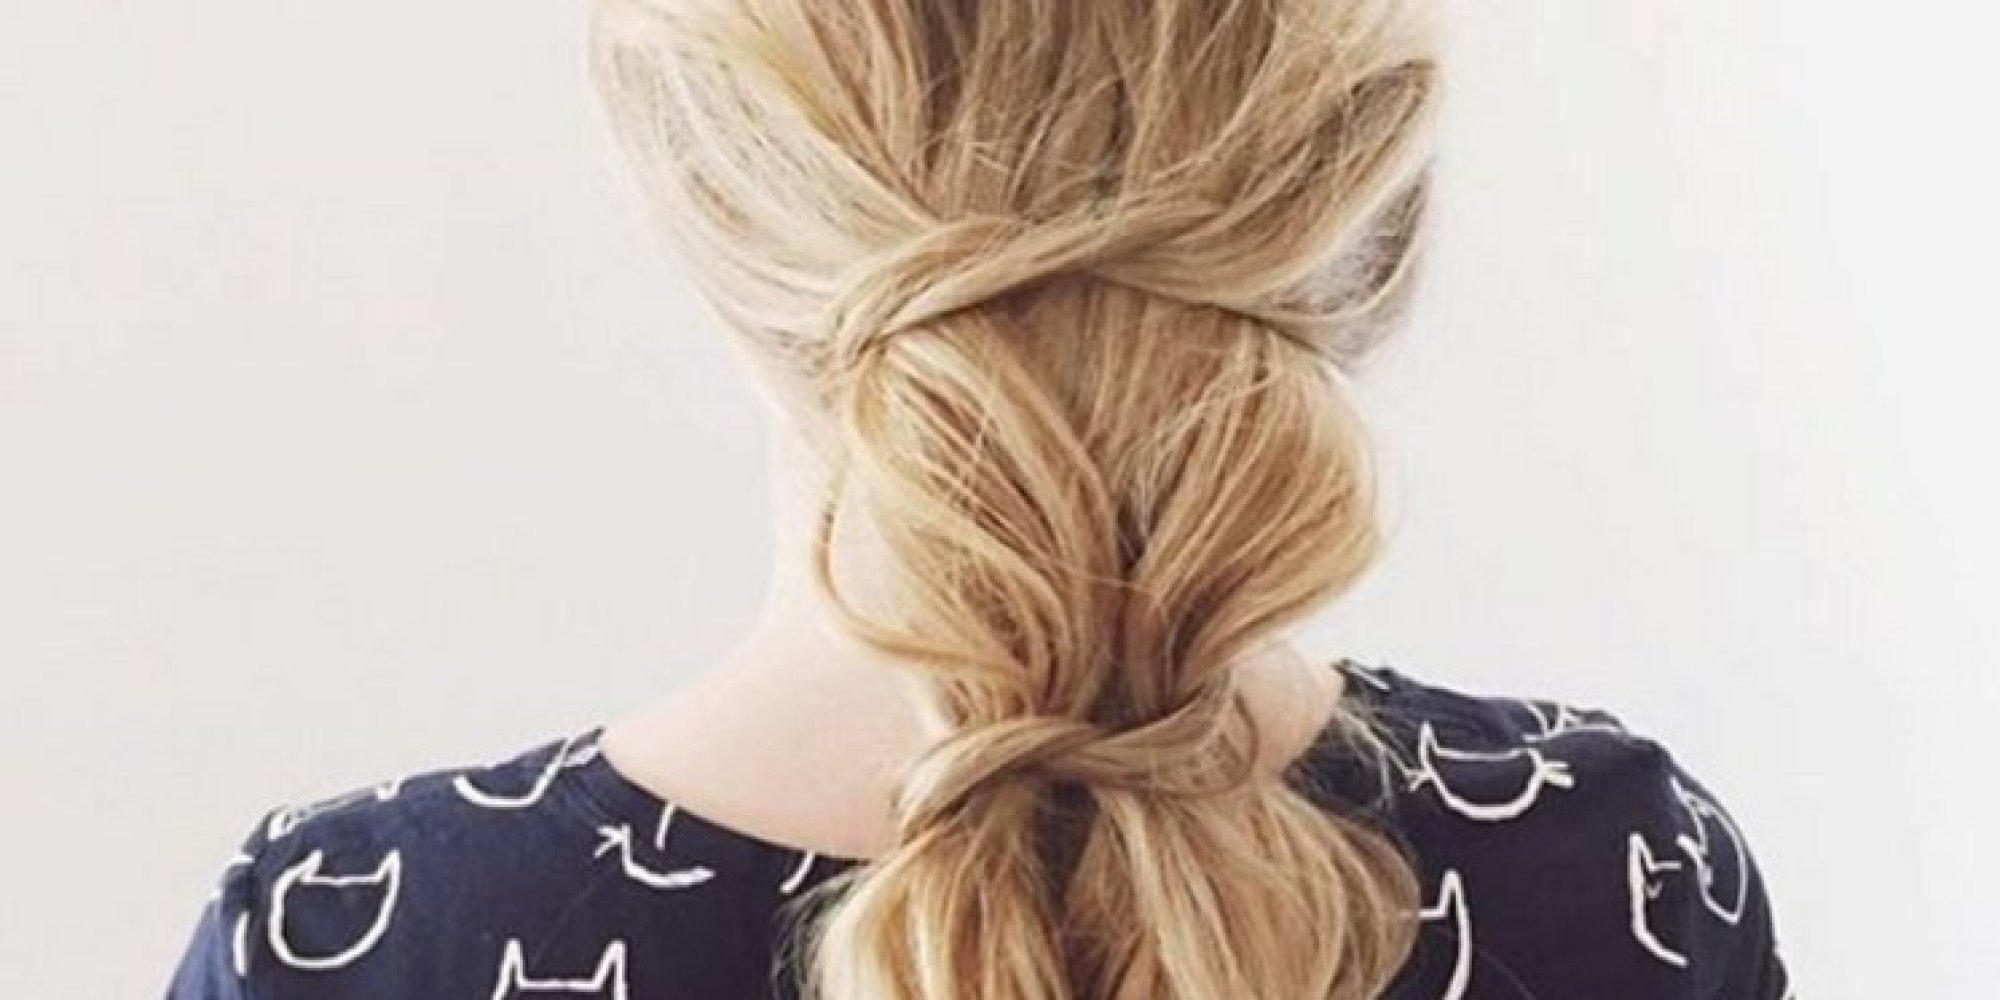 Summer Hairstyles For Long Hair: 20 'Dos To Try This Season